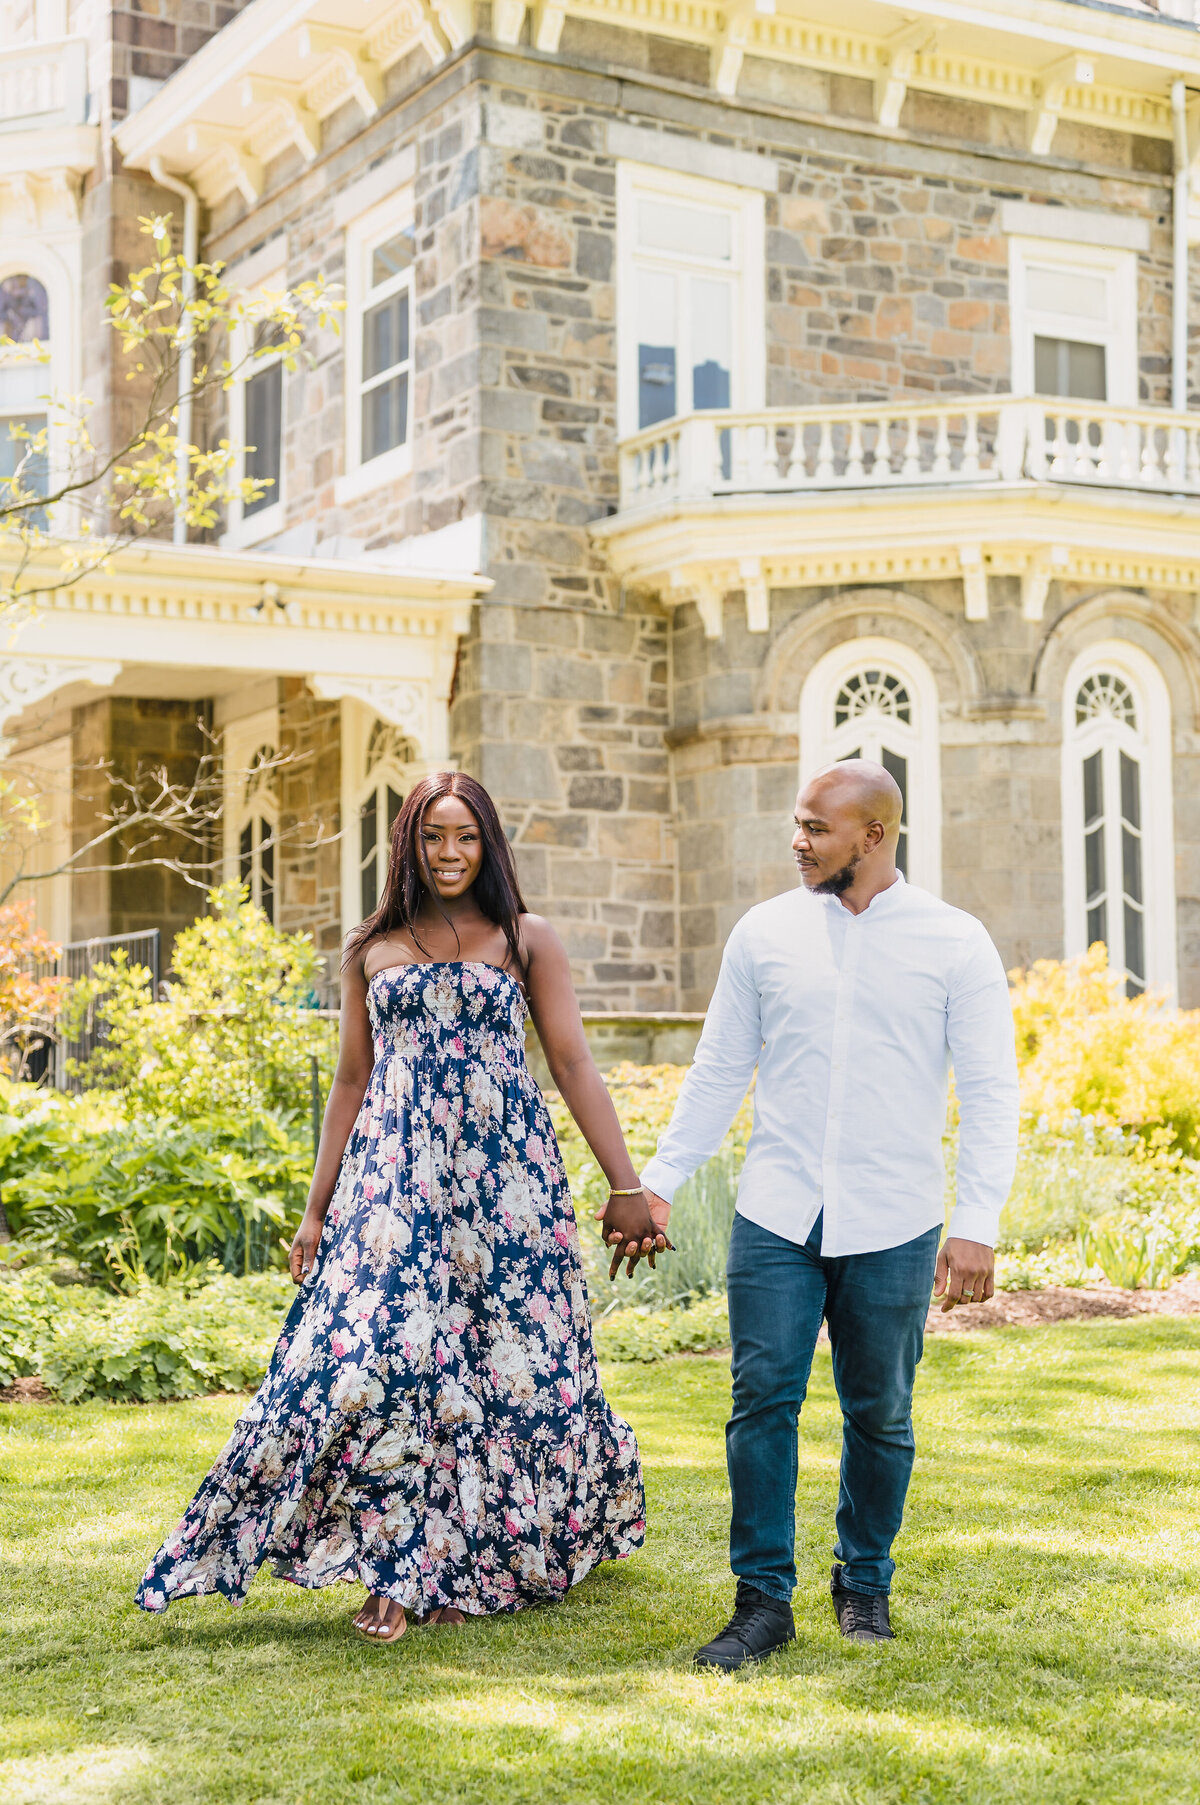 May12,2021_Tosin_Steven_EngagementSession_66-Edit